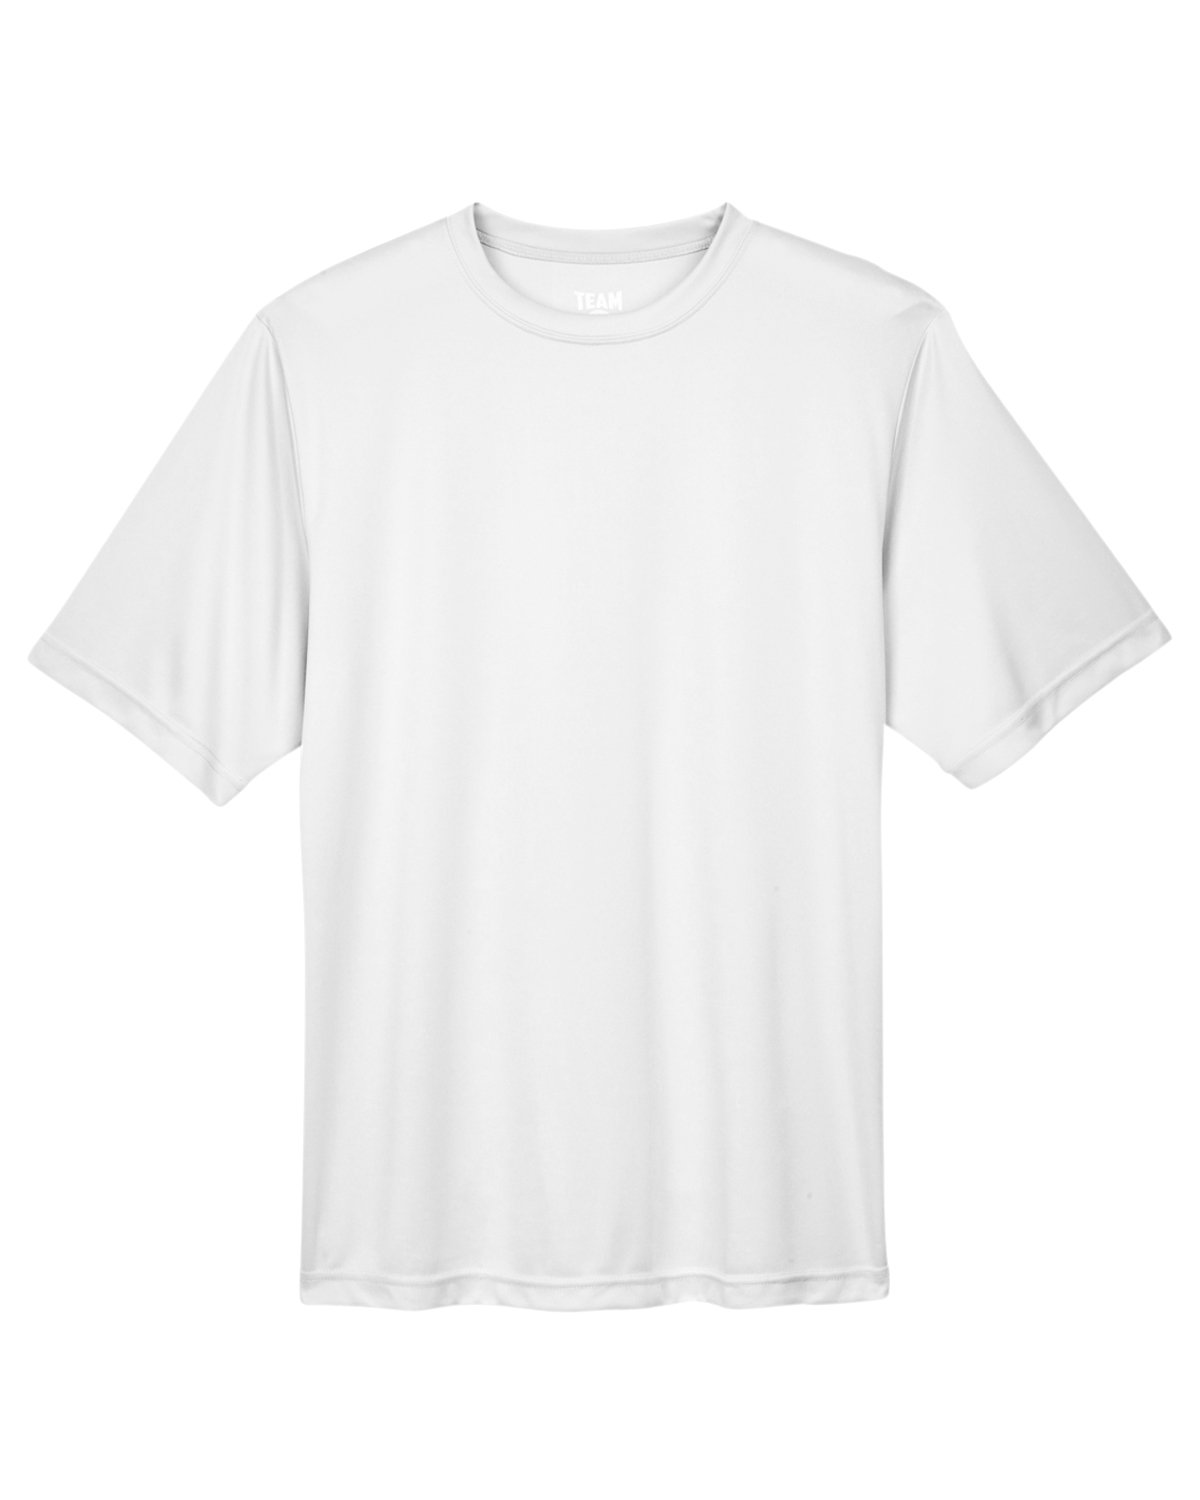 Picture of Team 365 Men's Zone Performance T-Shirt